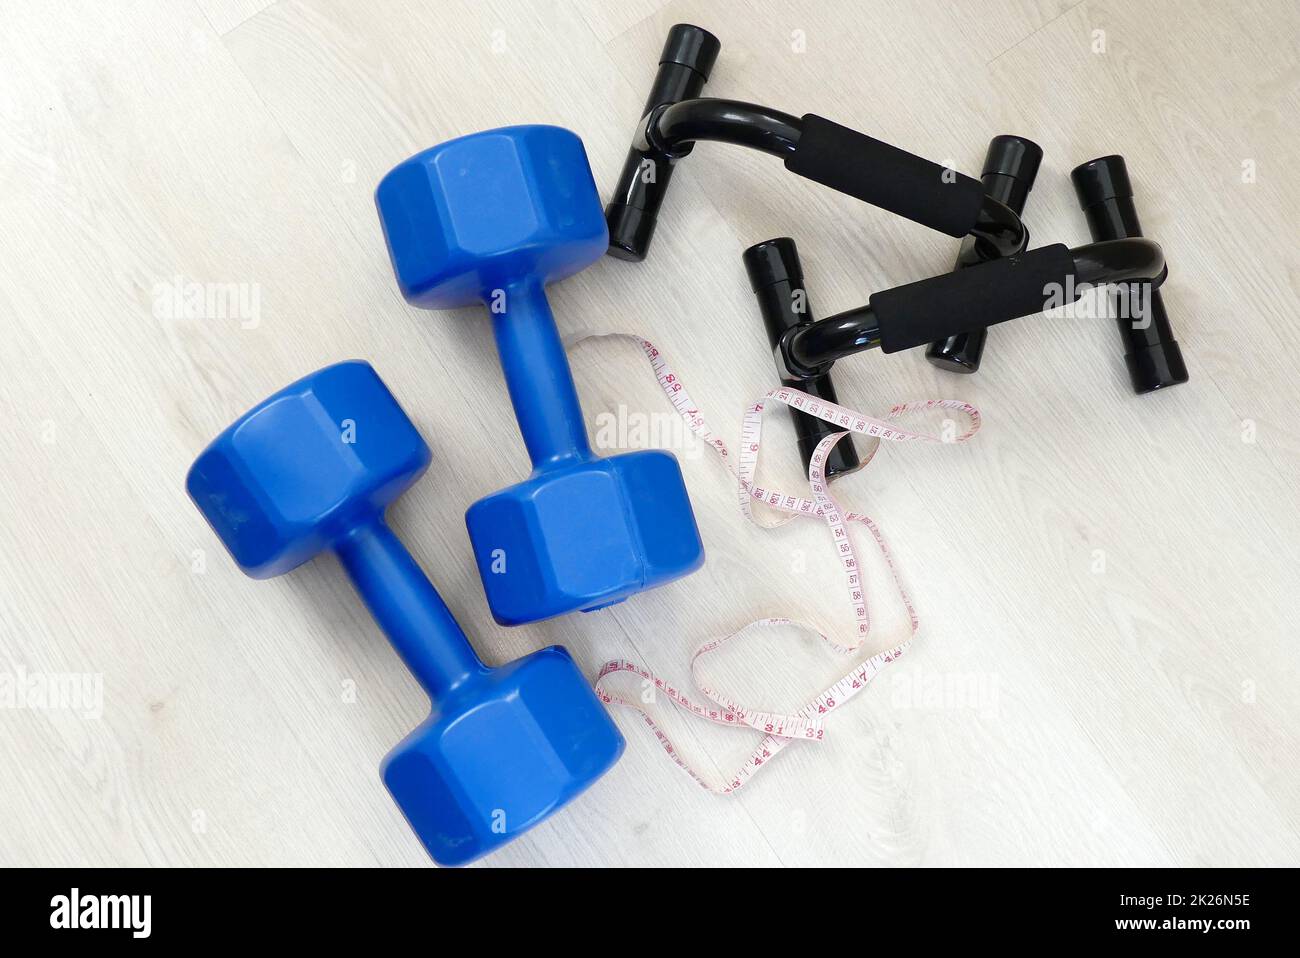 losing weight and losing weight, measuring tape in the same frame, 5 kg double hand dumbbells and push-up apparatus Stock Photo